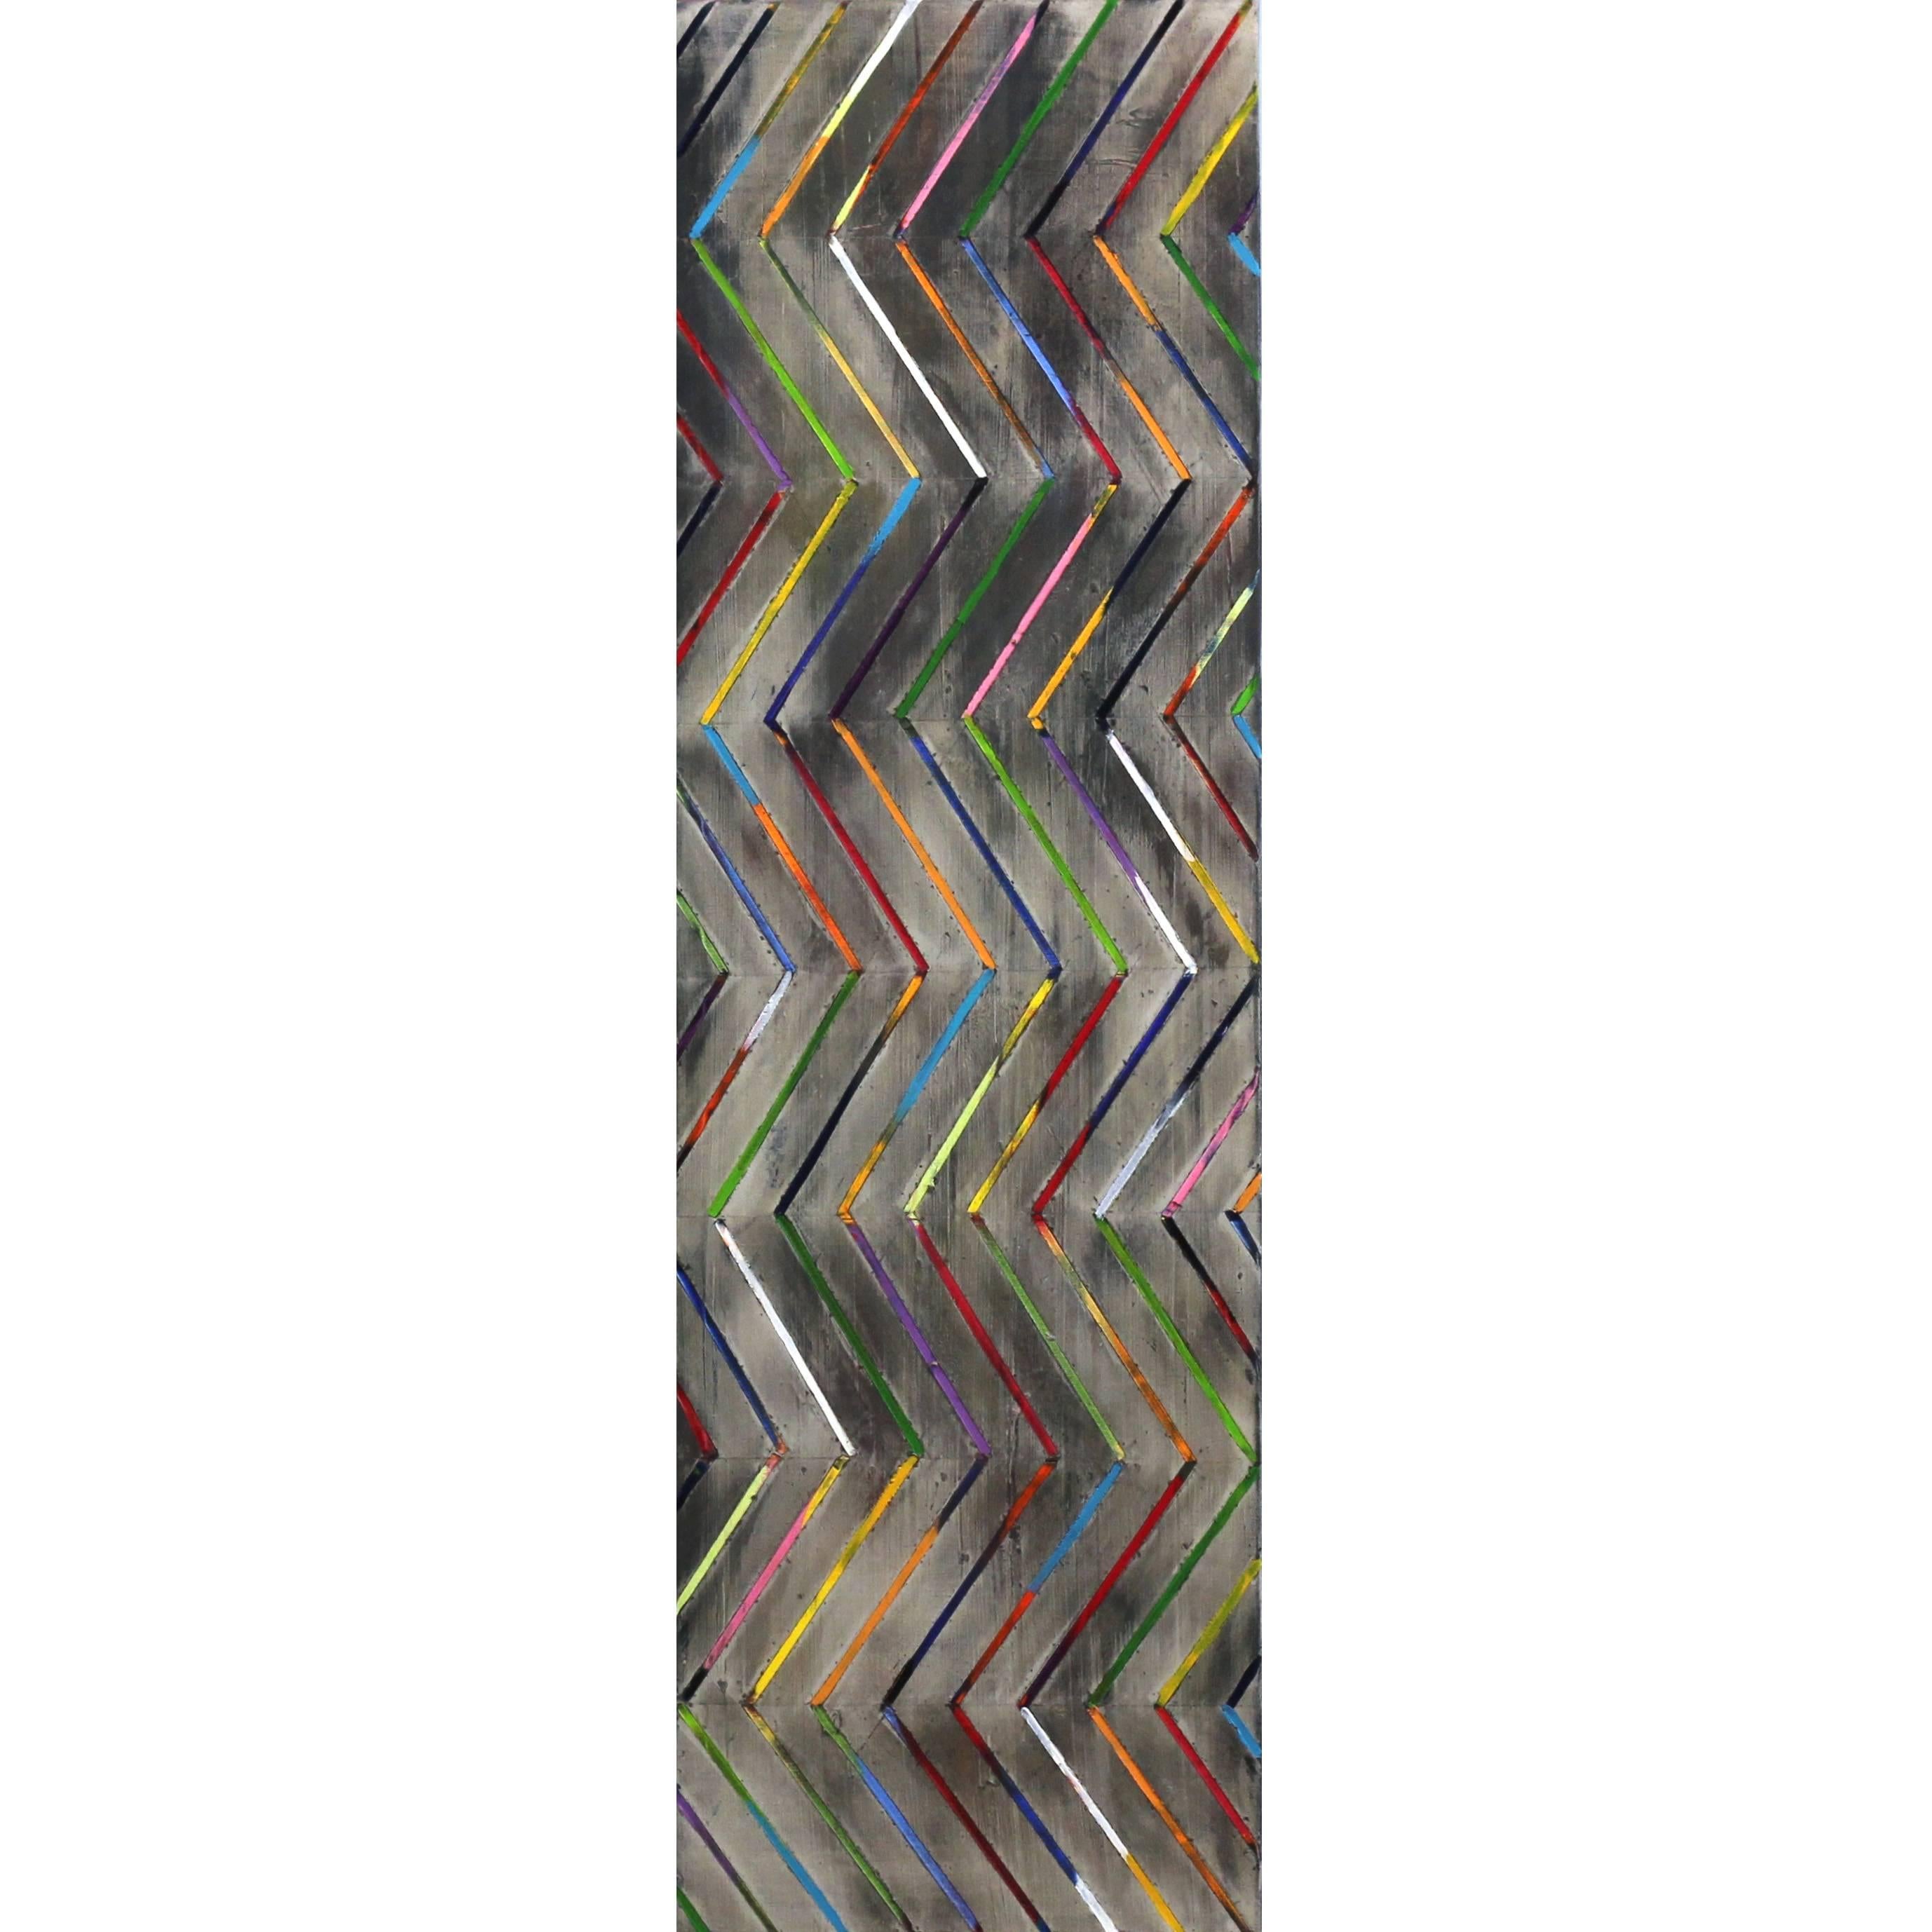 Petra Rös-Nickel Abstract Painting - Zig Zag 16-3-2 - Original Colorful Oil Painting Stripes with Texture